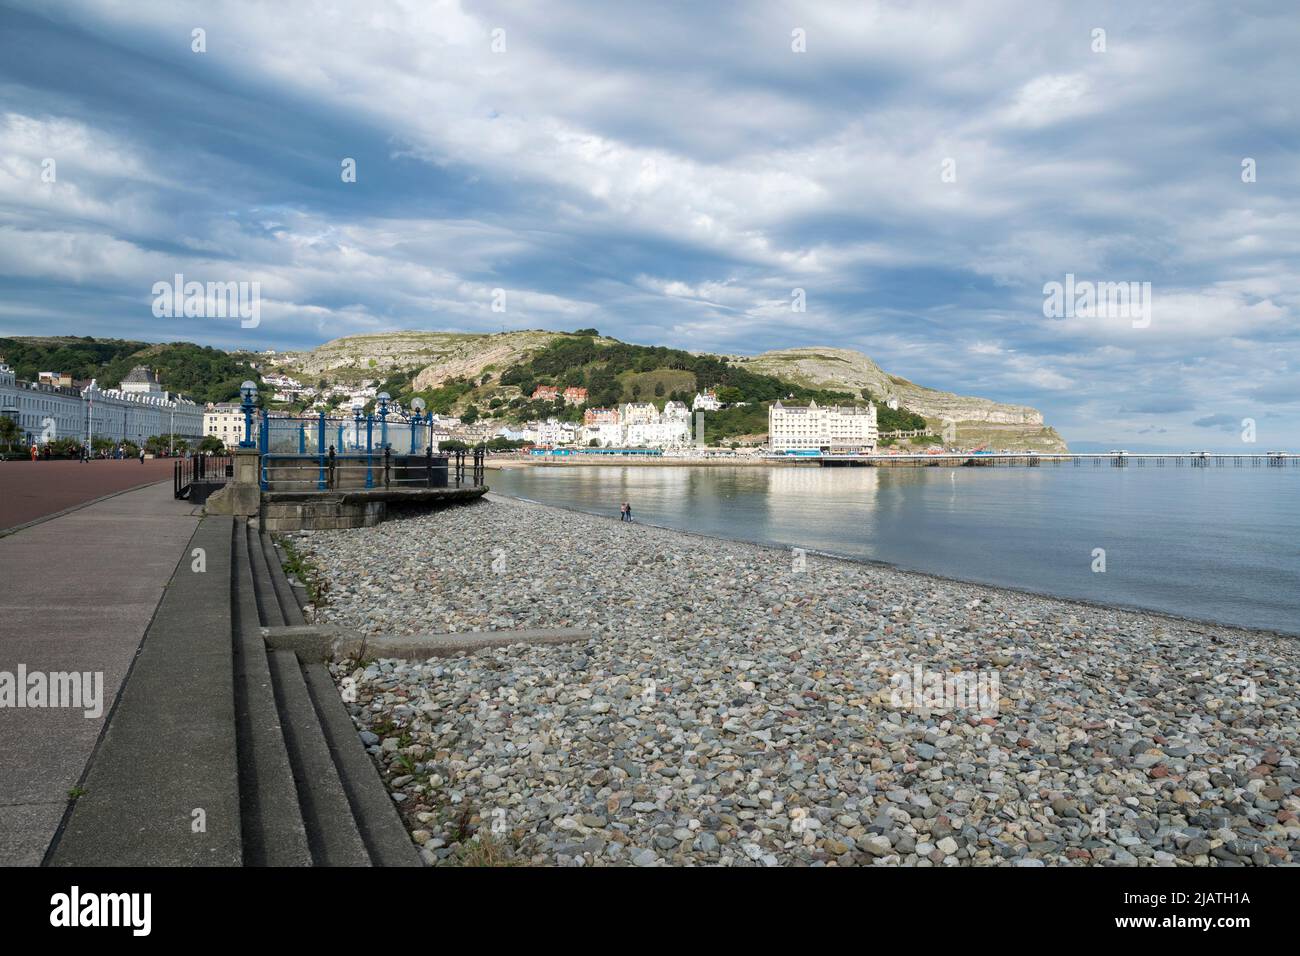 Llandudno promenade on the North Wales coast with the new ferris wheel, Grand hotel and the pier in the distance Stock Photo